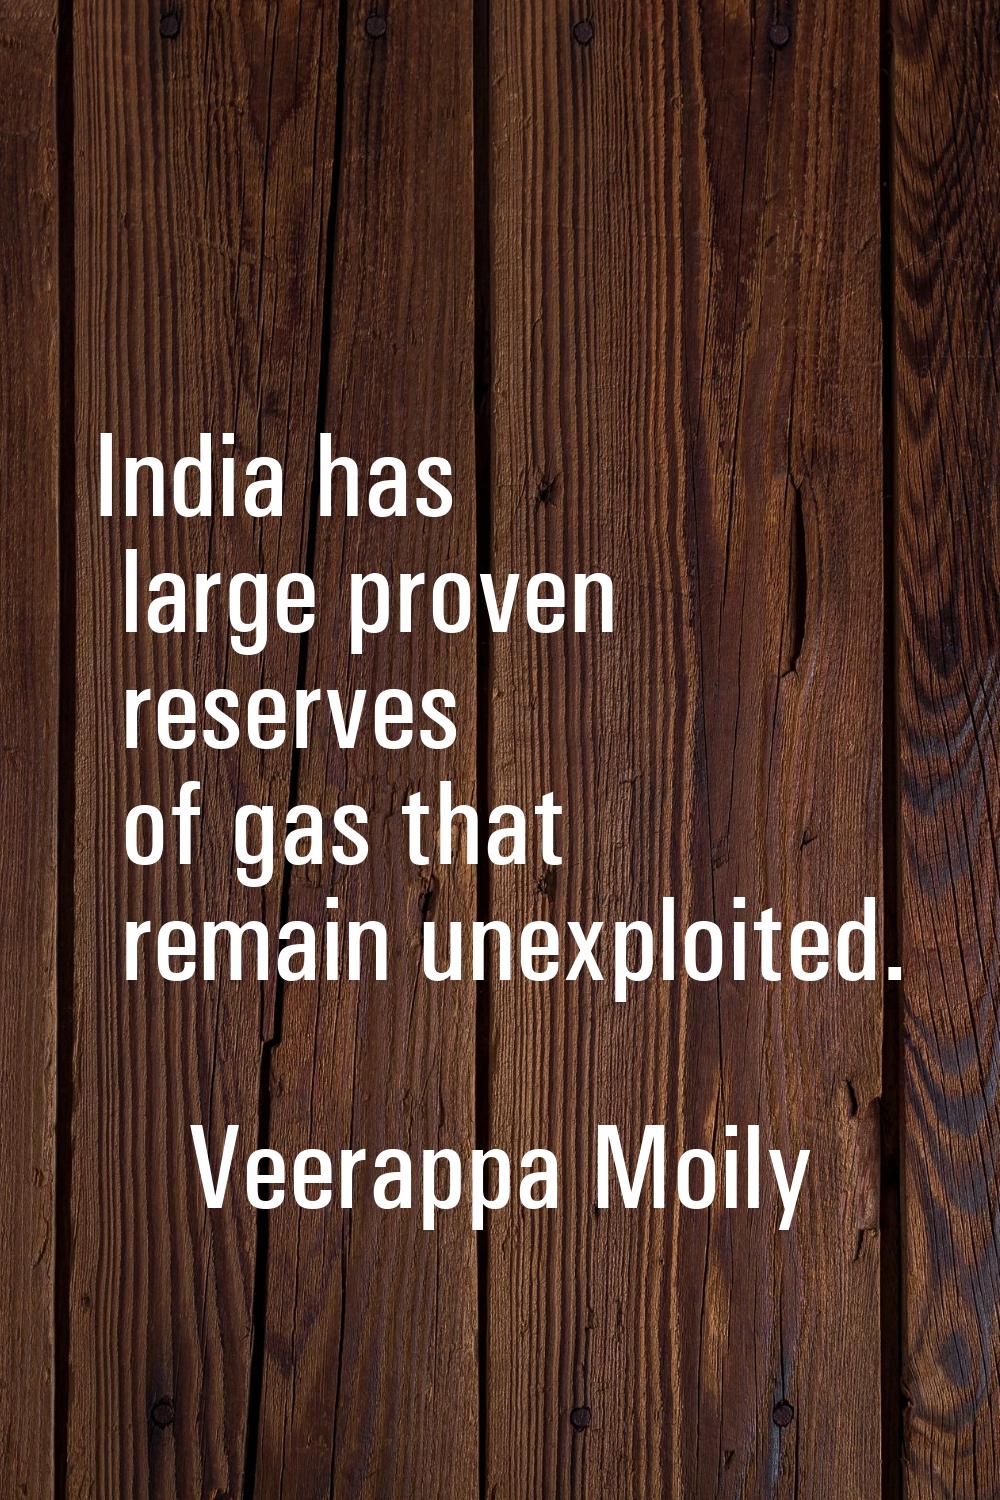 India has large proven reserves of gas that remain unexploited.